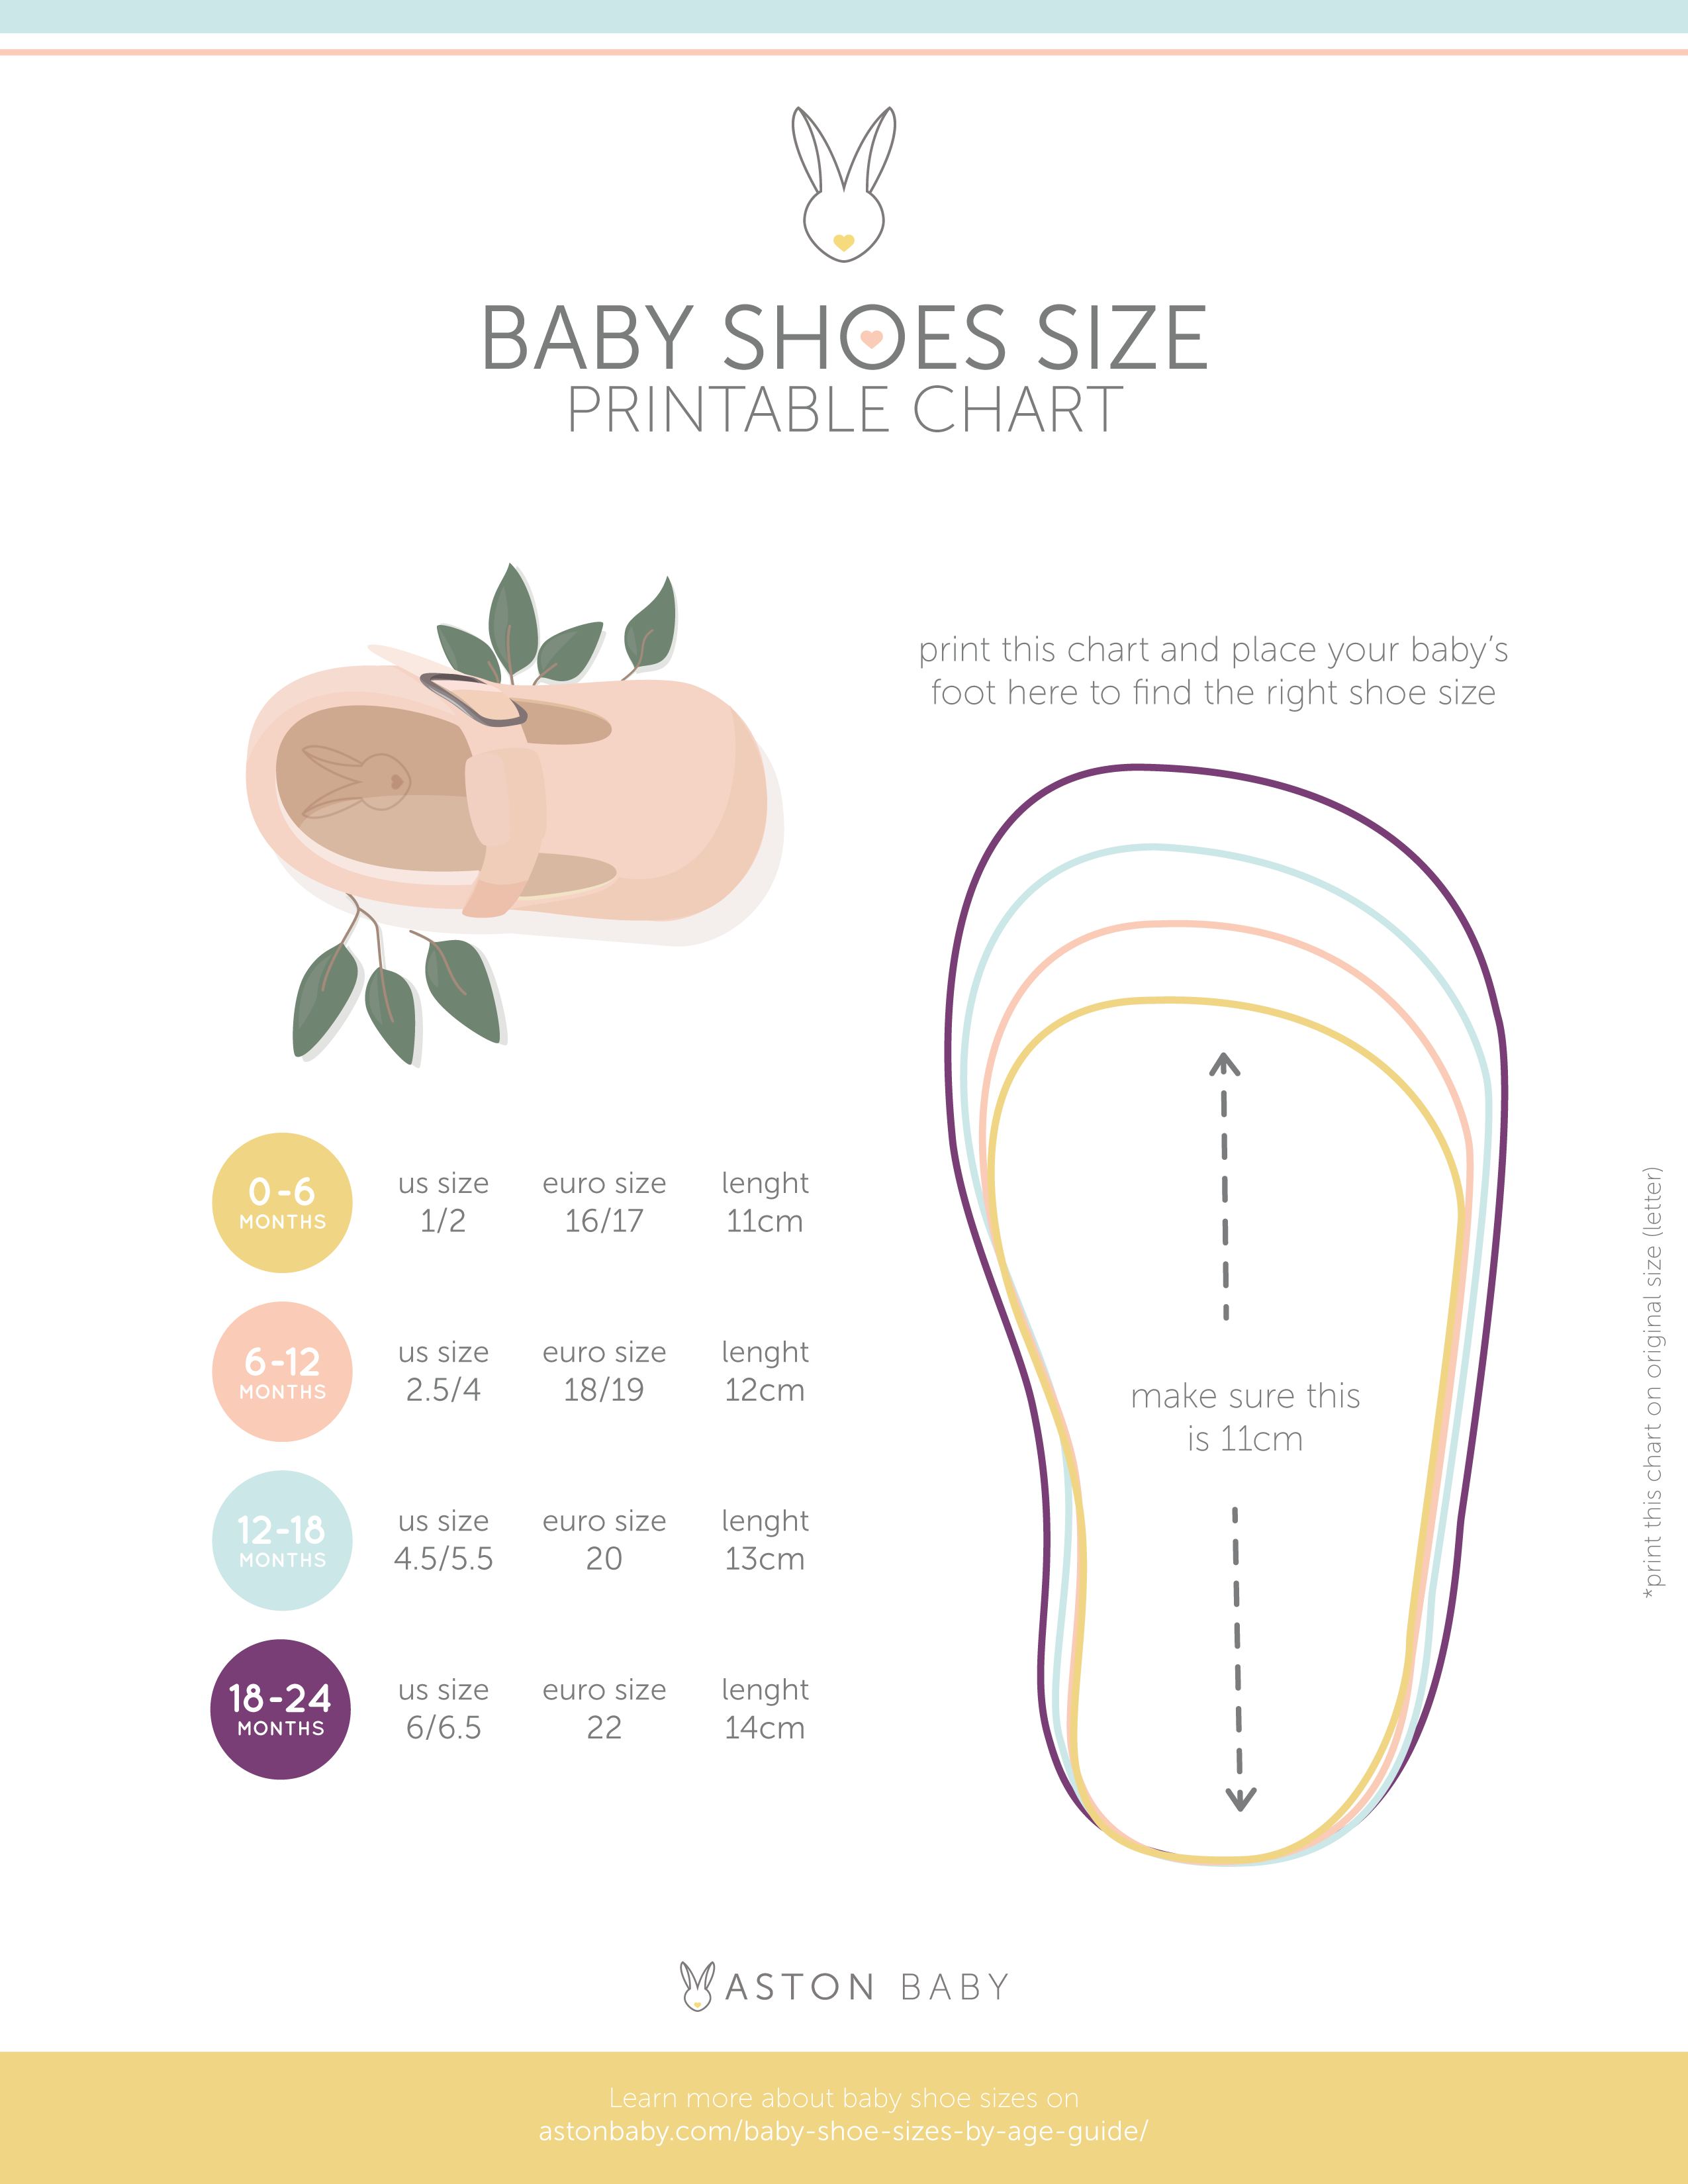 How To Select Baby Shoe Sizes Based On Your Baby’s Age A Guide Aston